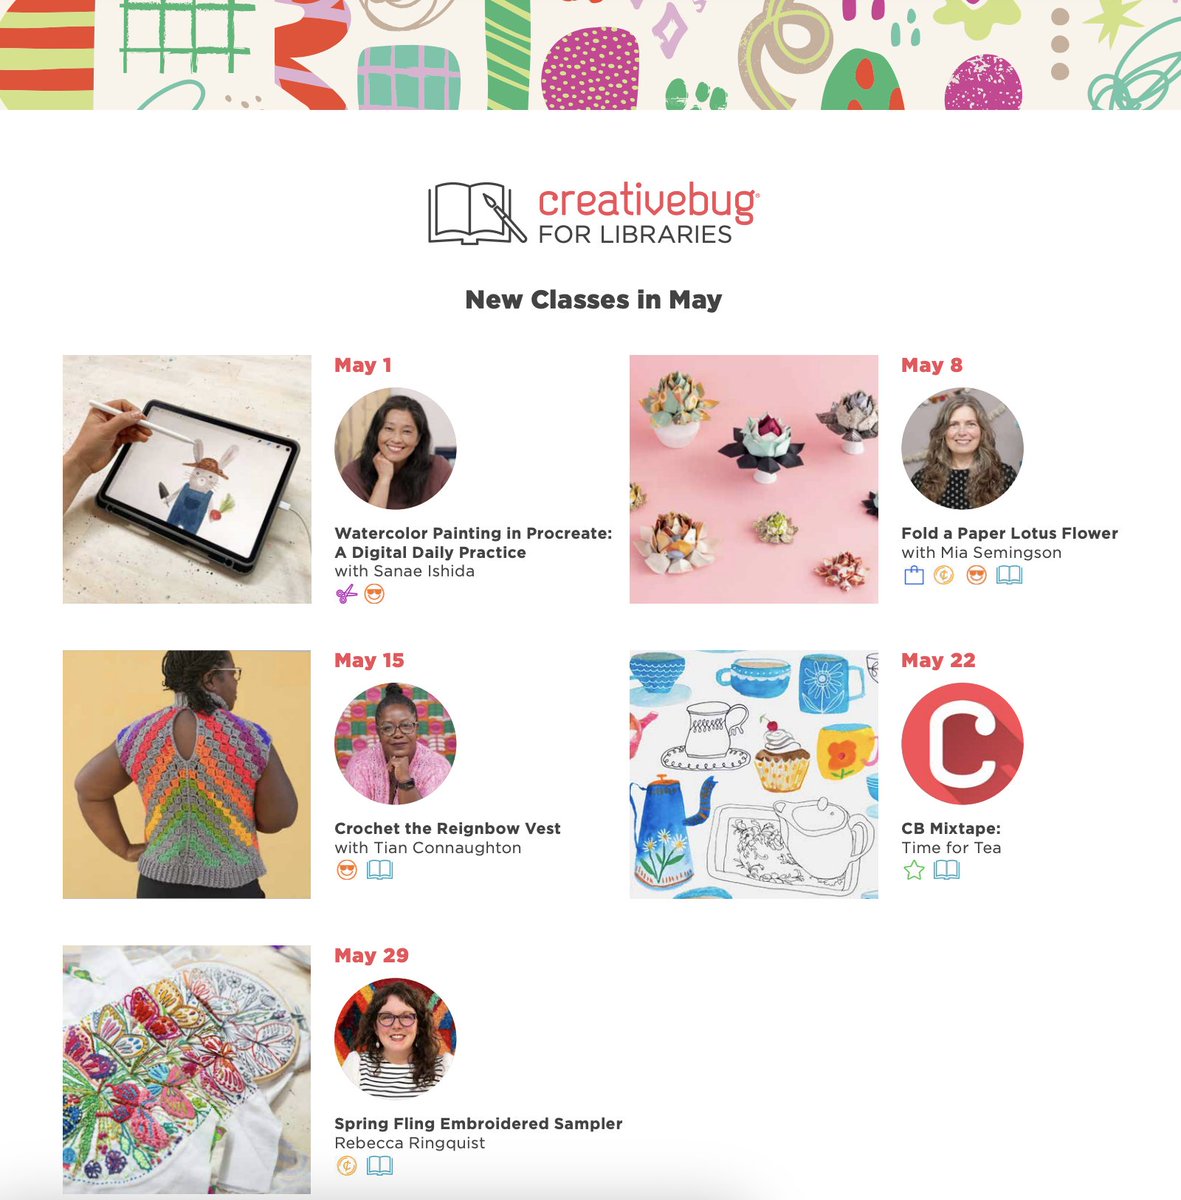 Your library card gives you access to Creativebug, a crafty platform for free. Take classes, watch tutorials, download printables, and more. Sign up now for exciting May classes! #Creativebug #Fulcolibrary #Crafts #Digitalresource #maycrafts